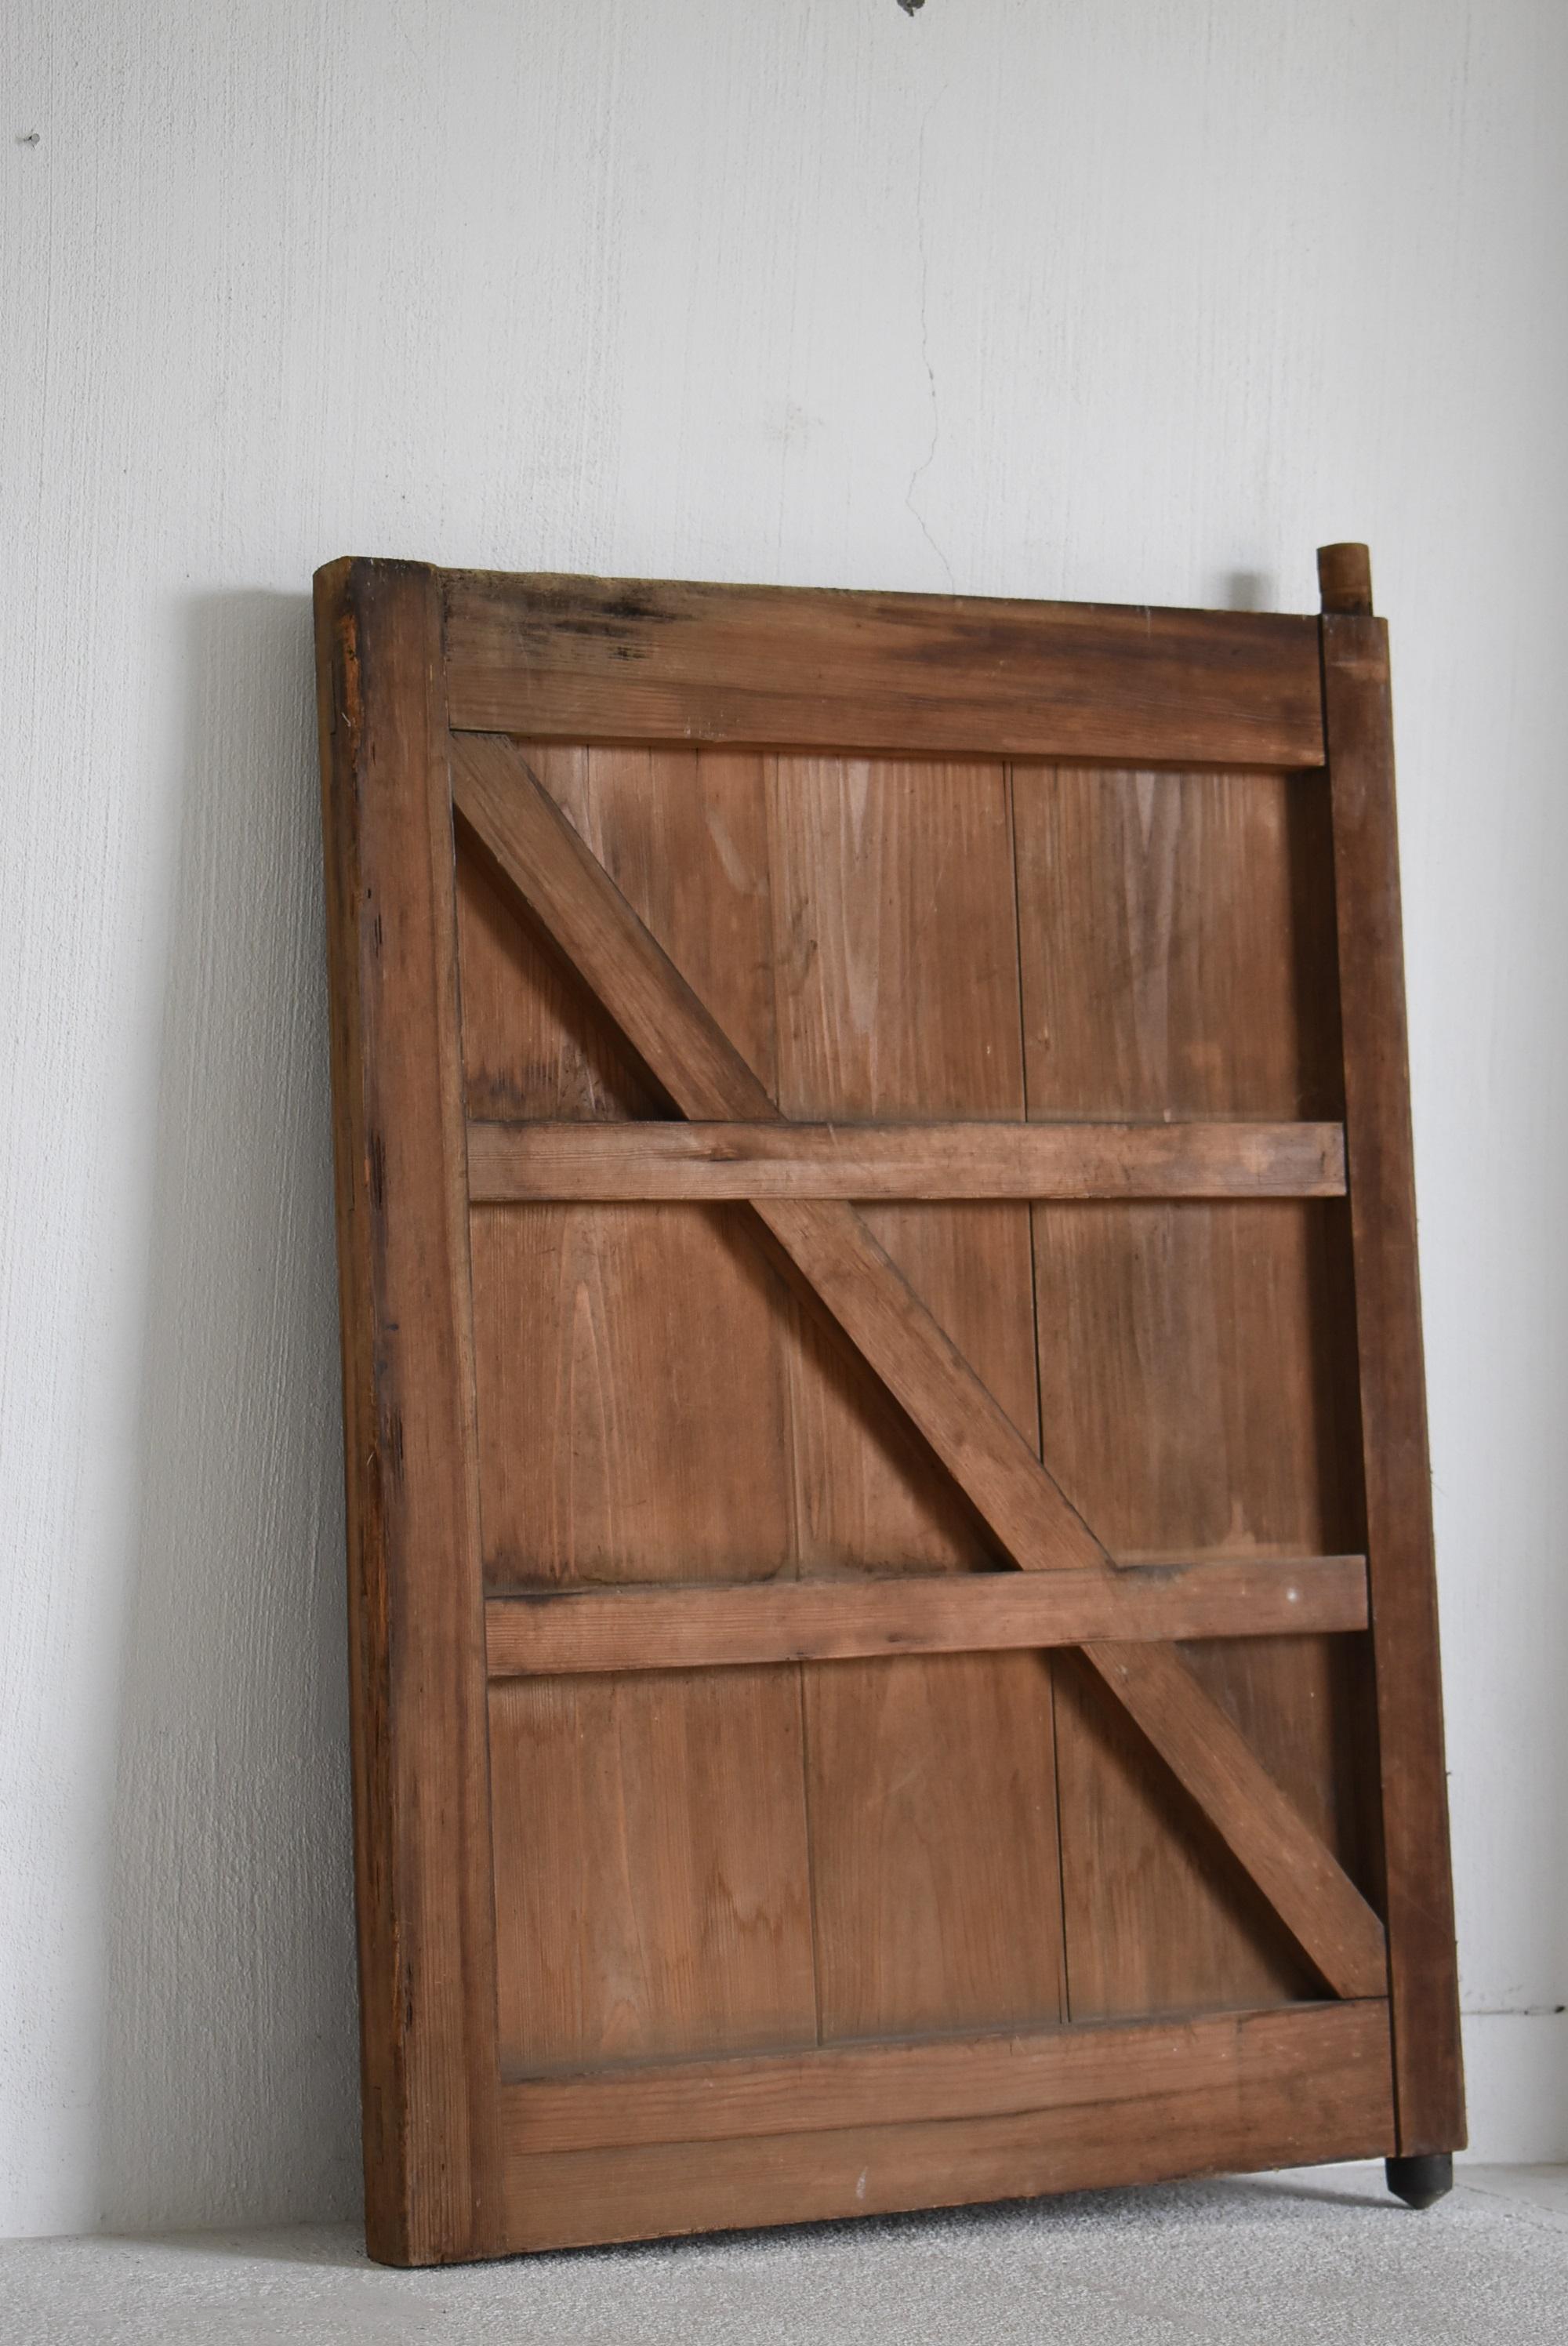 Wood Japanese Old Door 1750s-1860s/Antique Architecture Abstract Art Wabisabi Object